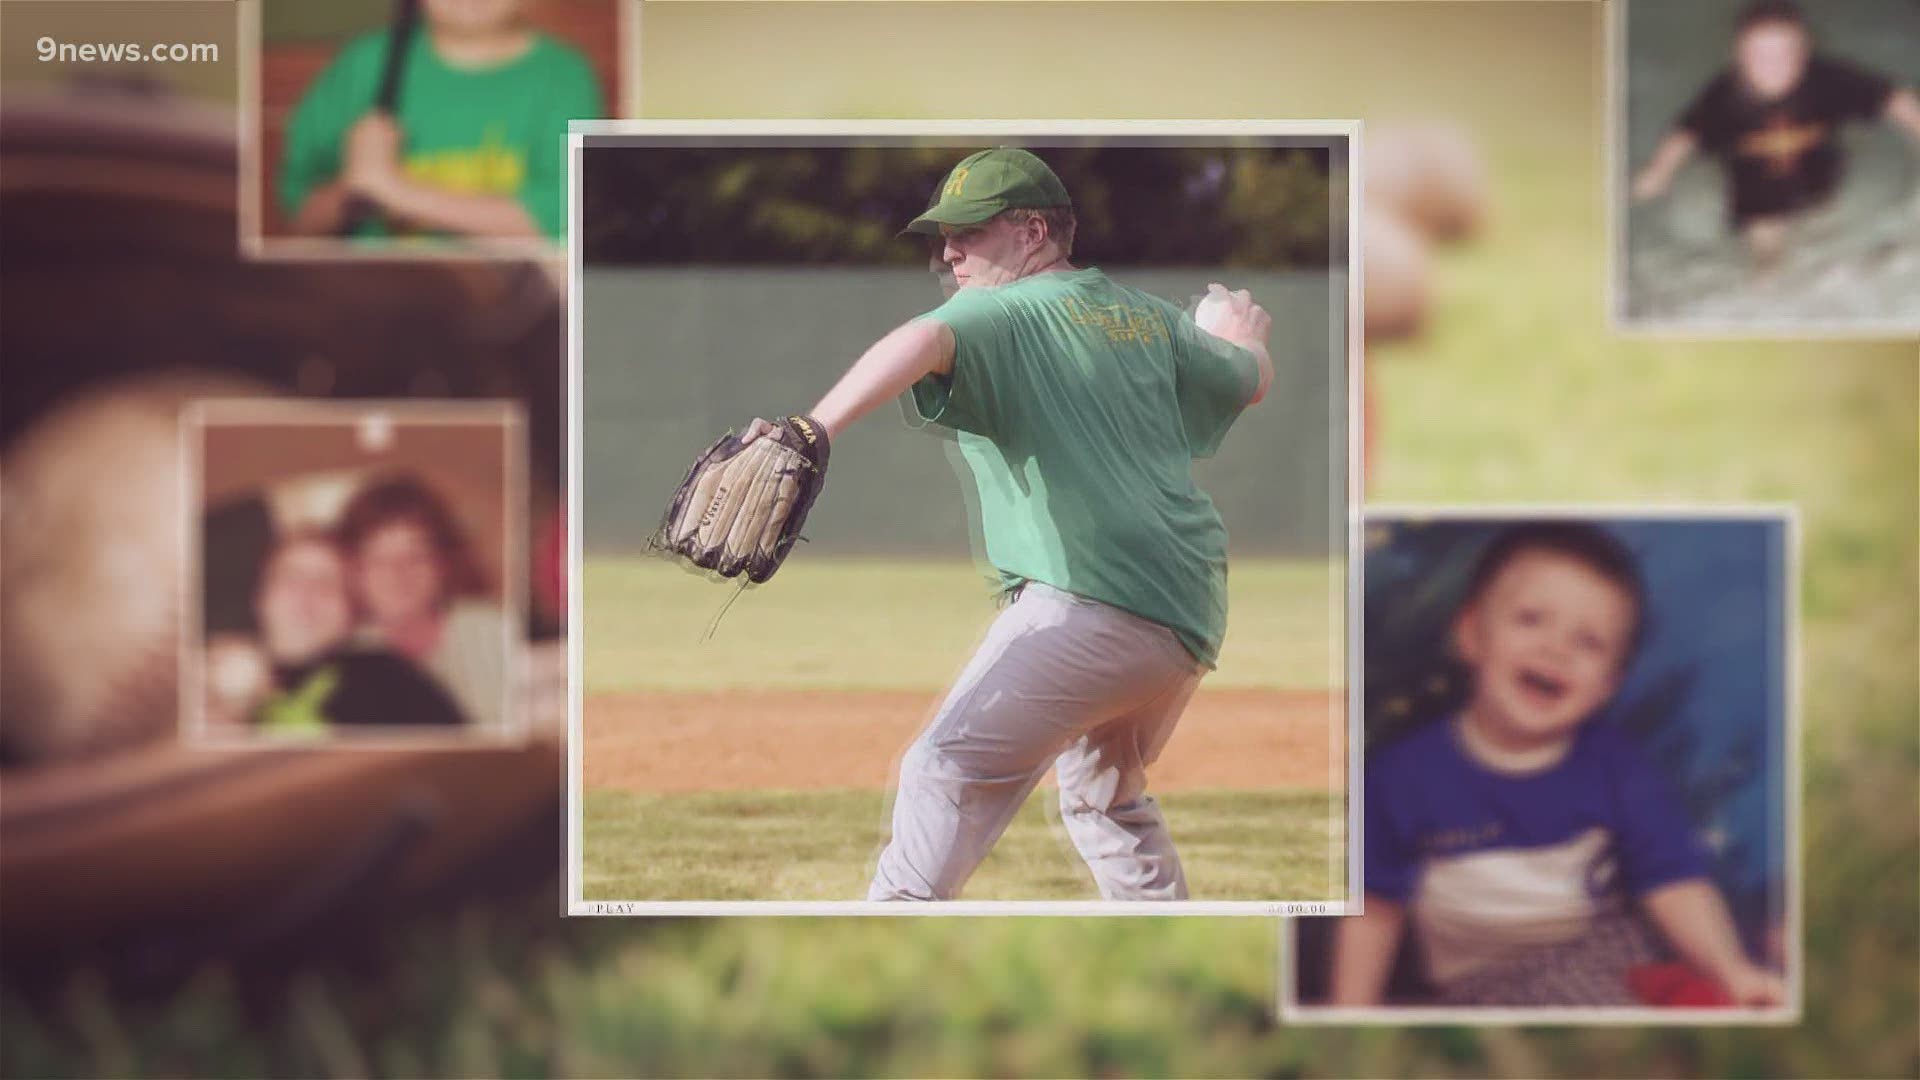 Despite getting turned down from coaches, one man wouldn't let his love of playing the game of baseball fade away.